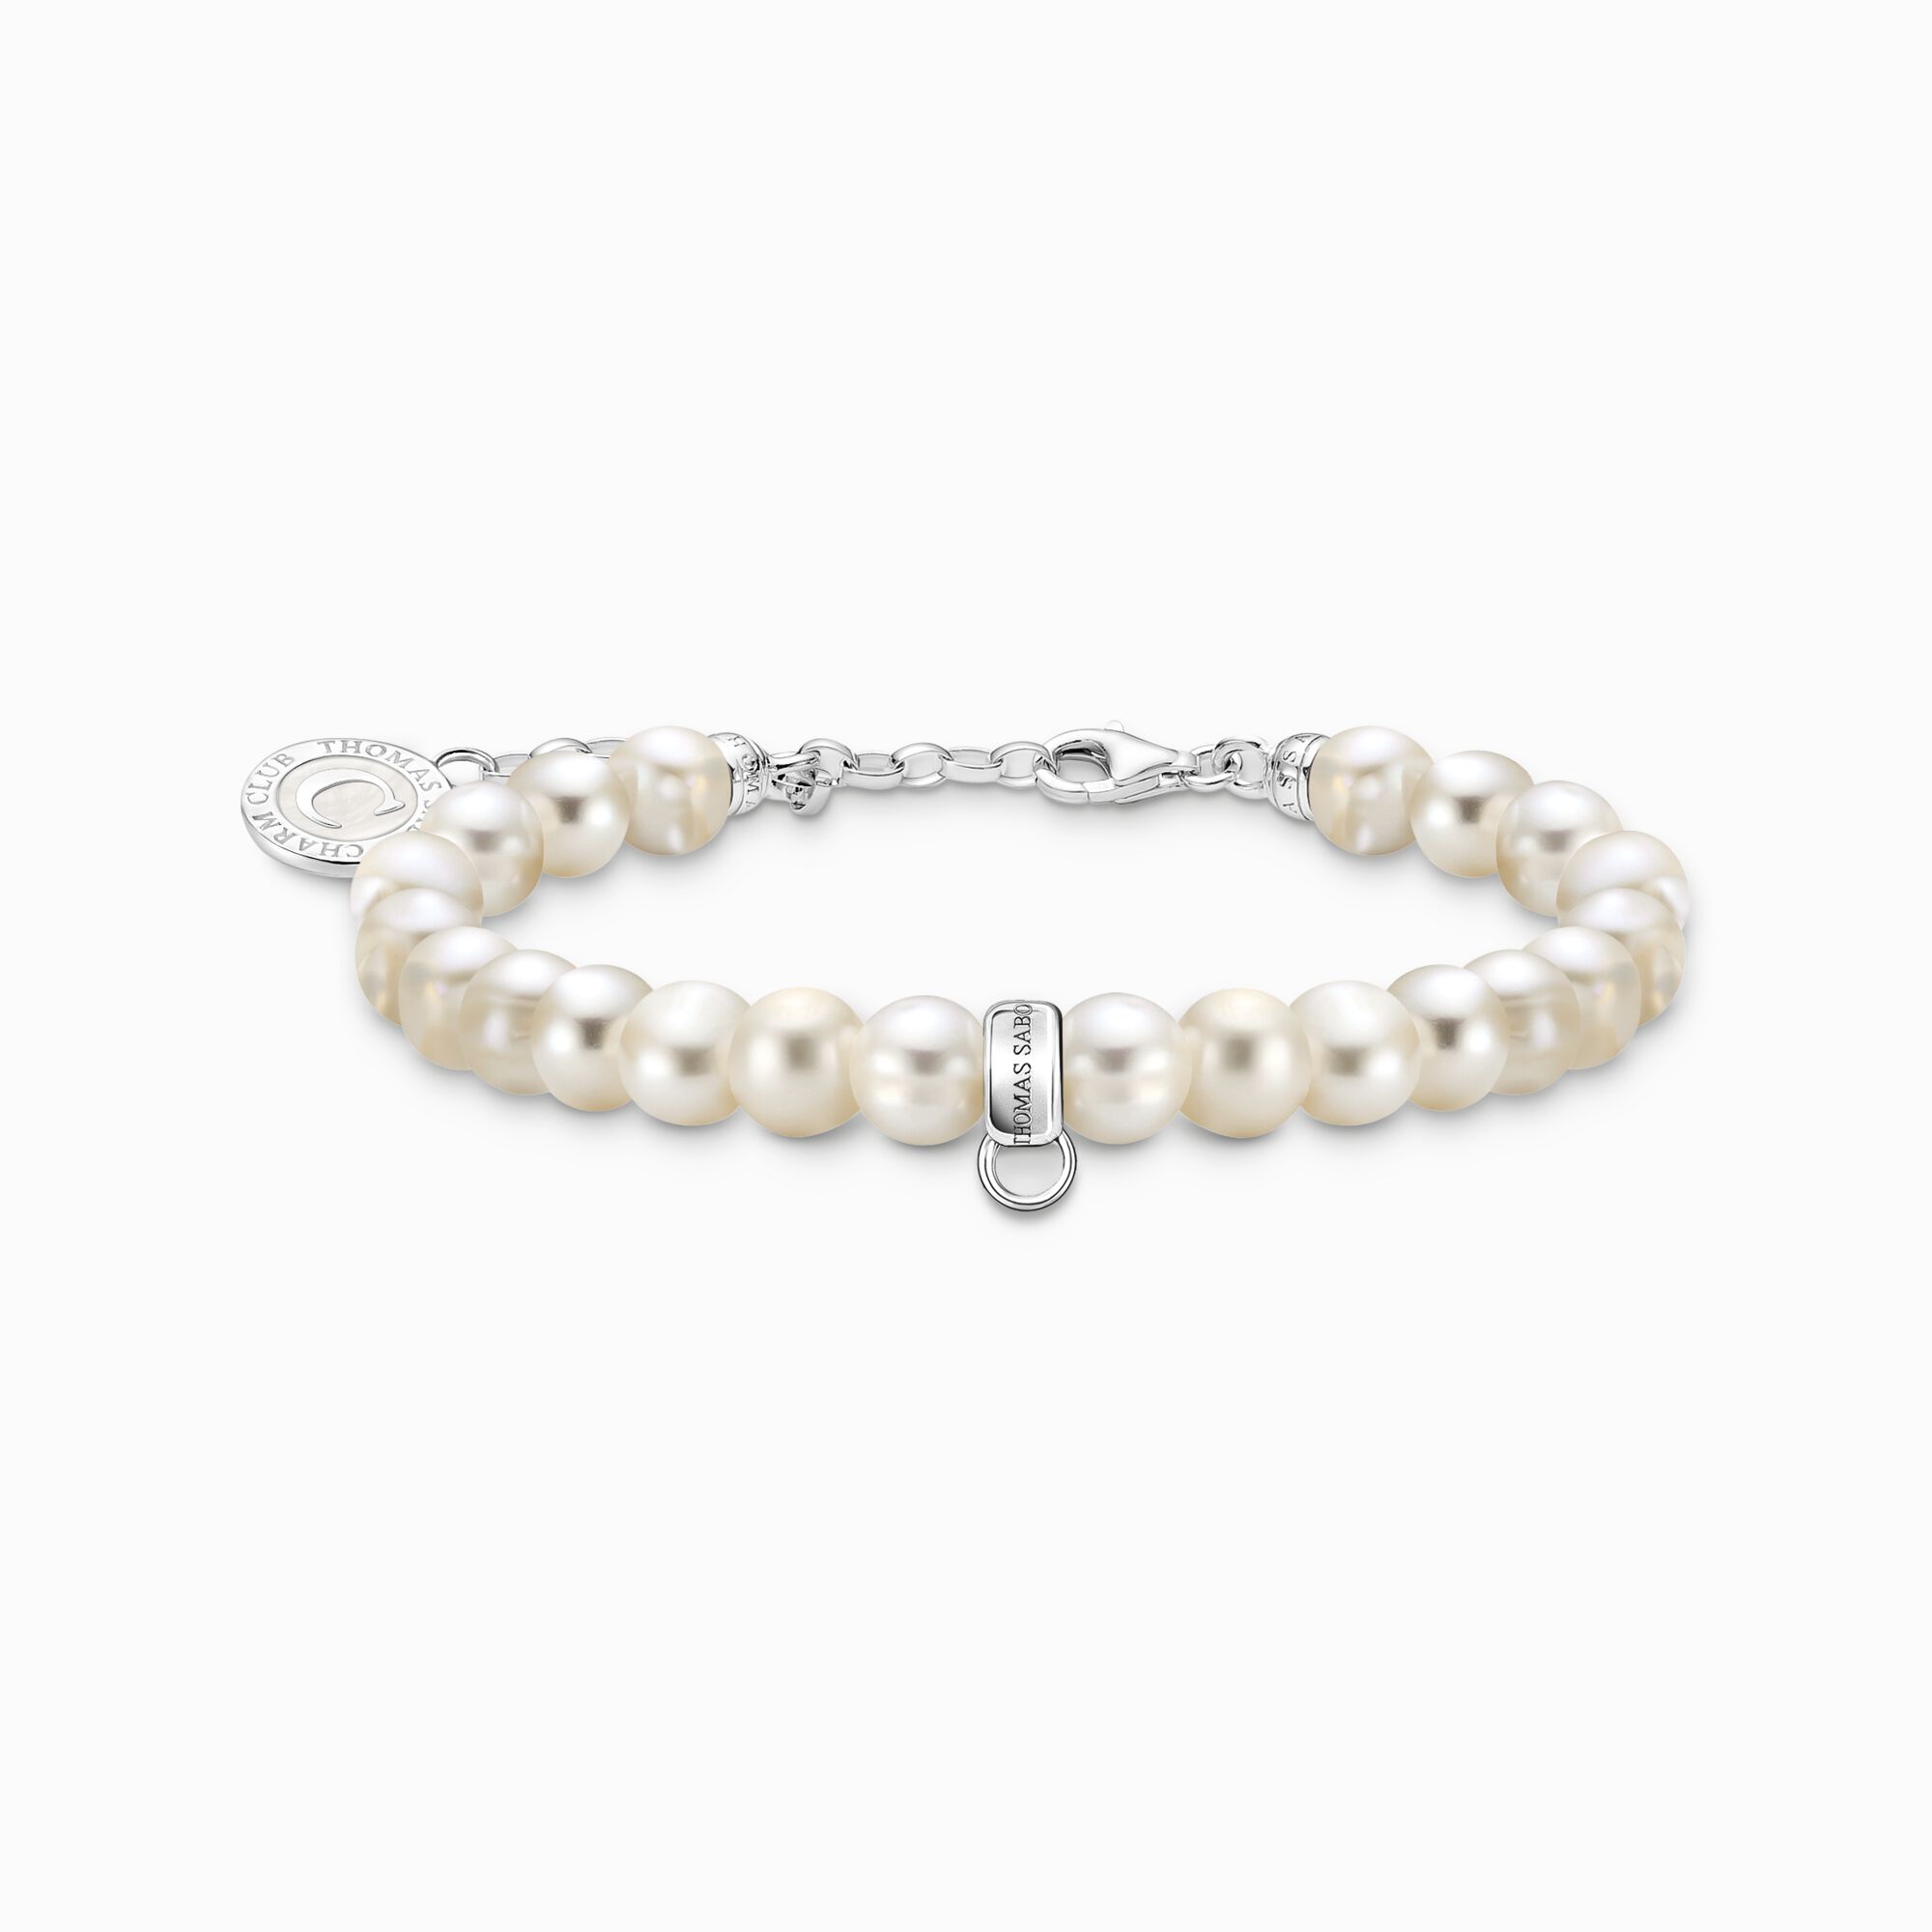 Silver charm member bracelet with white oval-shaped pearls from the Charm Club collection in the THOMAS SABO online store